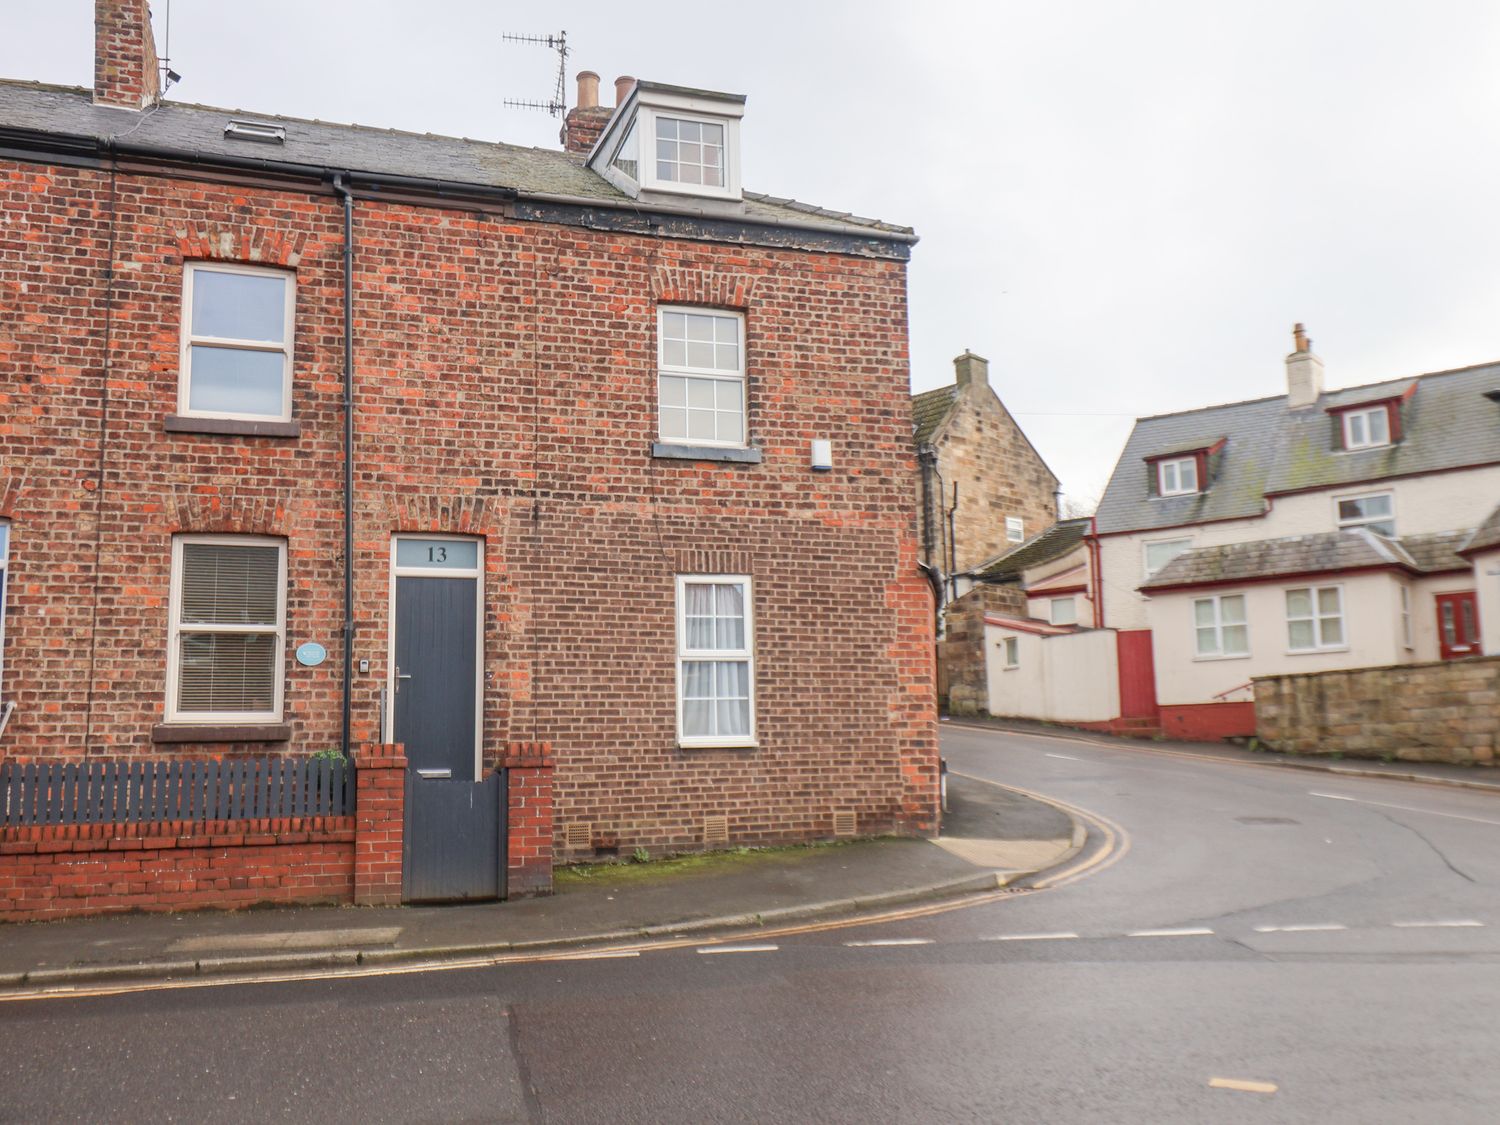 13 Green Lane - North Yorkshire (incl. Whitby) - 1137922 - photo 1